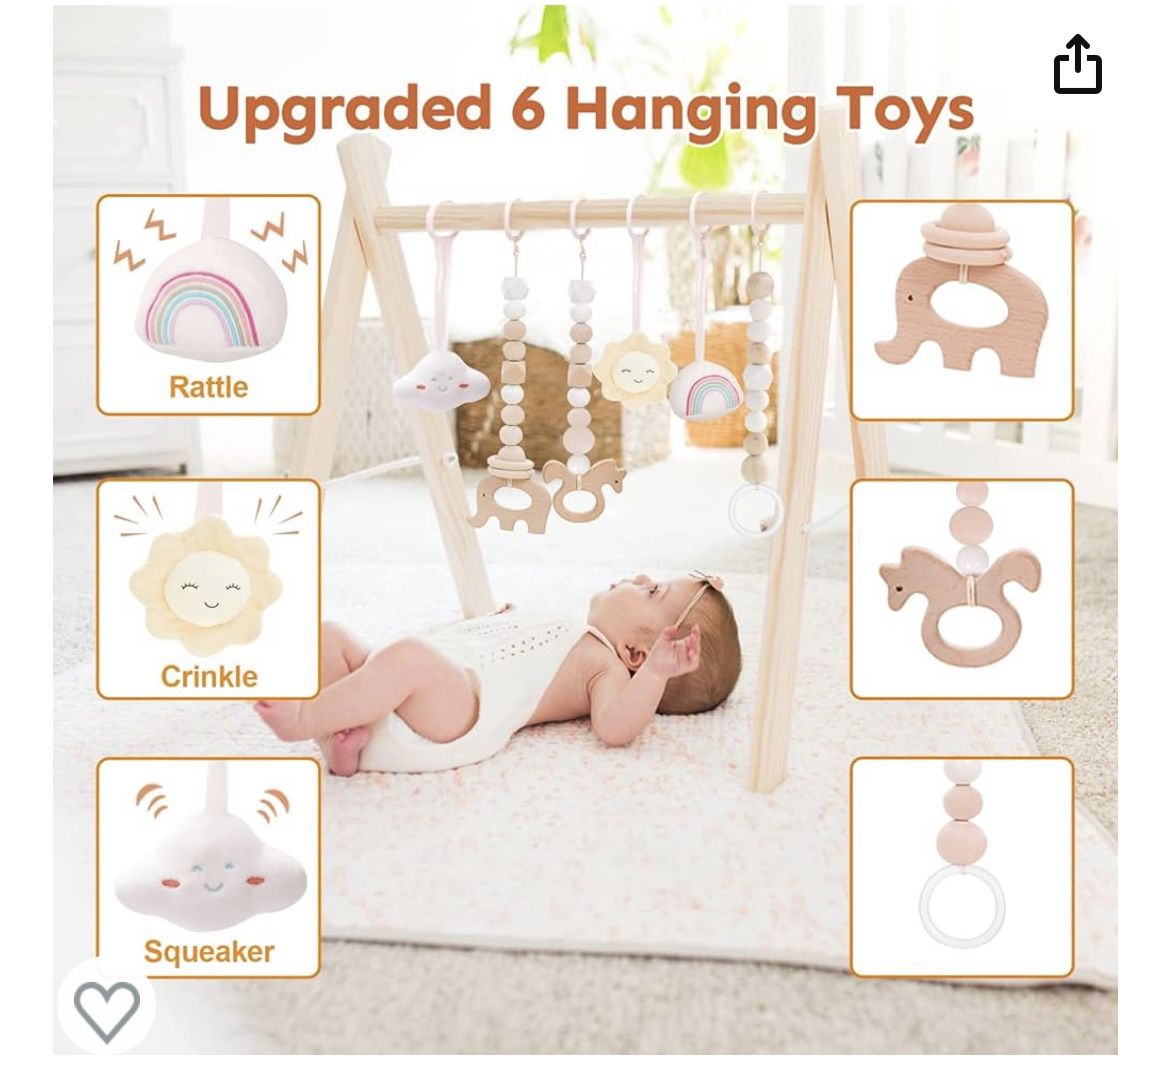 Wooden Baby Gym with Wooden Baby Toys Foldable Baby Play Gym Frame Activity Gym Hanging Bar Newborn Gift Baby Girl and Boy Gym (Natural Color